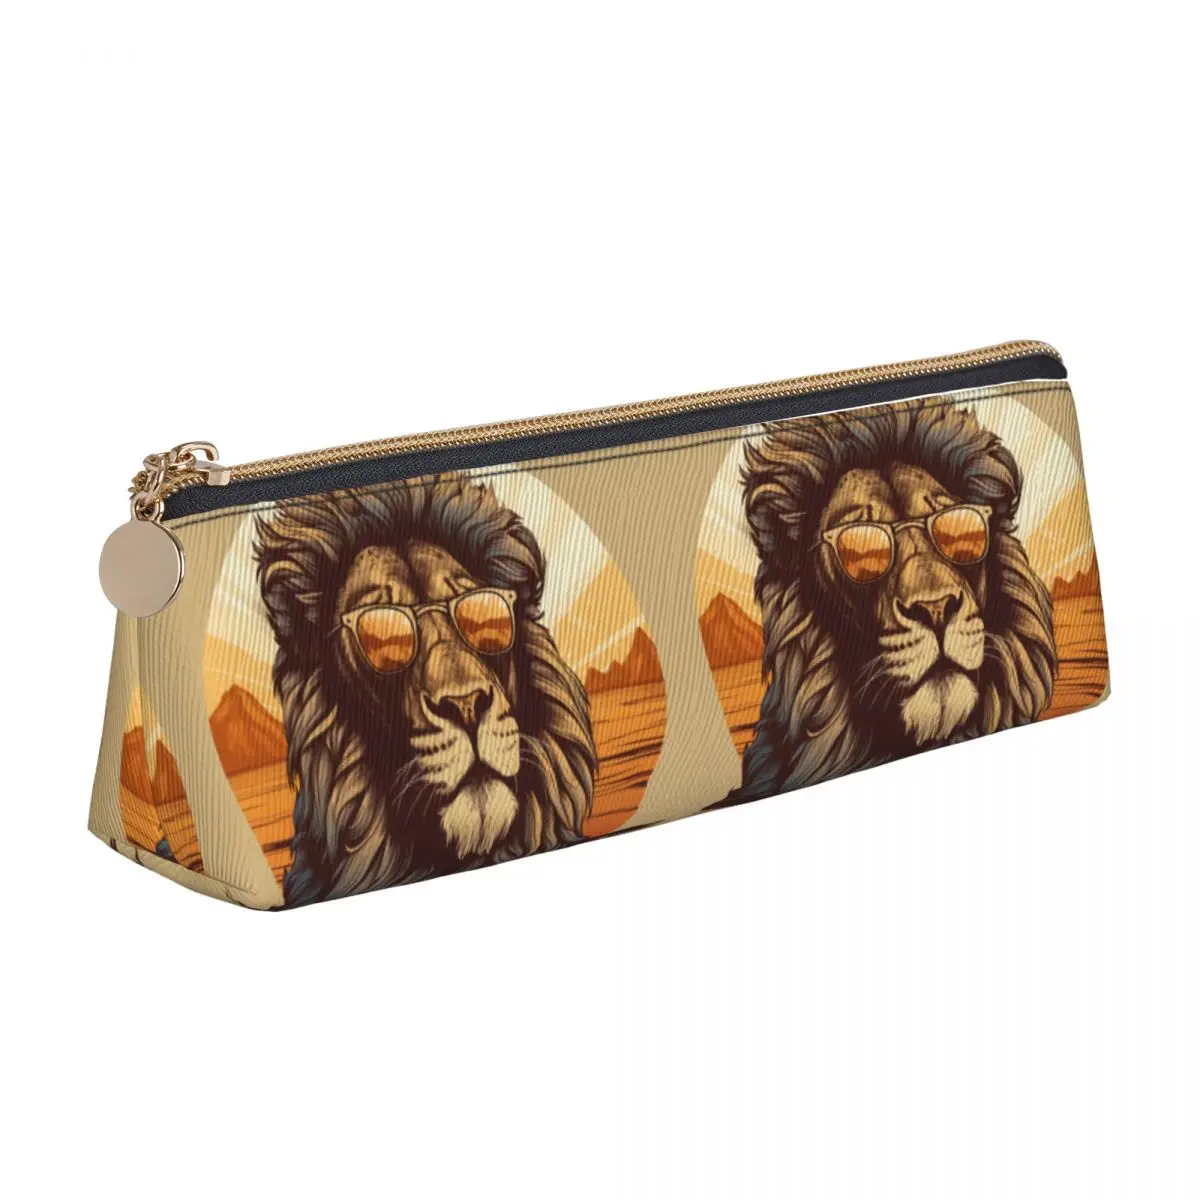 Lion Triangle Pencil Case Retro Sunset Animals With Sunglasses Teens Back to School Zipper Pencil Box Cool Leather Pen Organizer